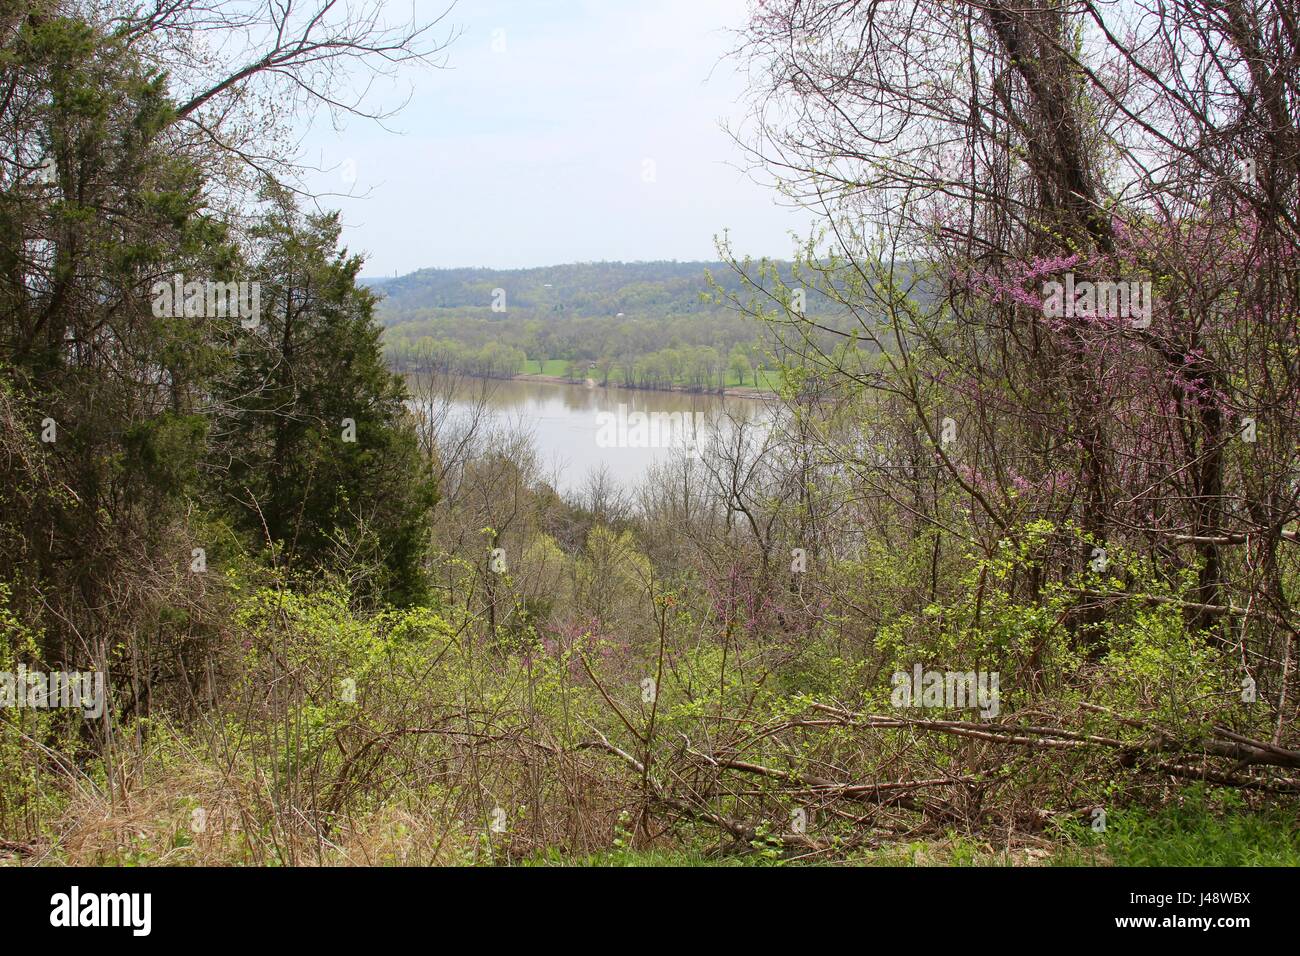 The trails and the forest along with the views of river,lake and pond. Stock Photo